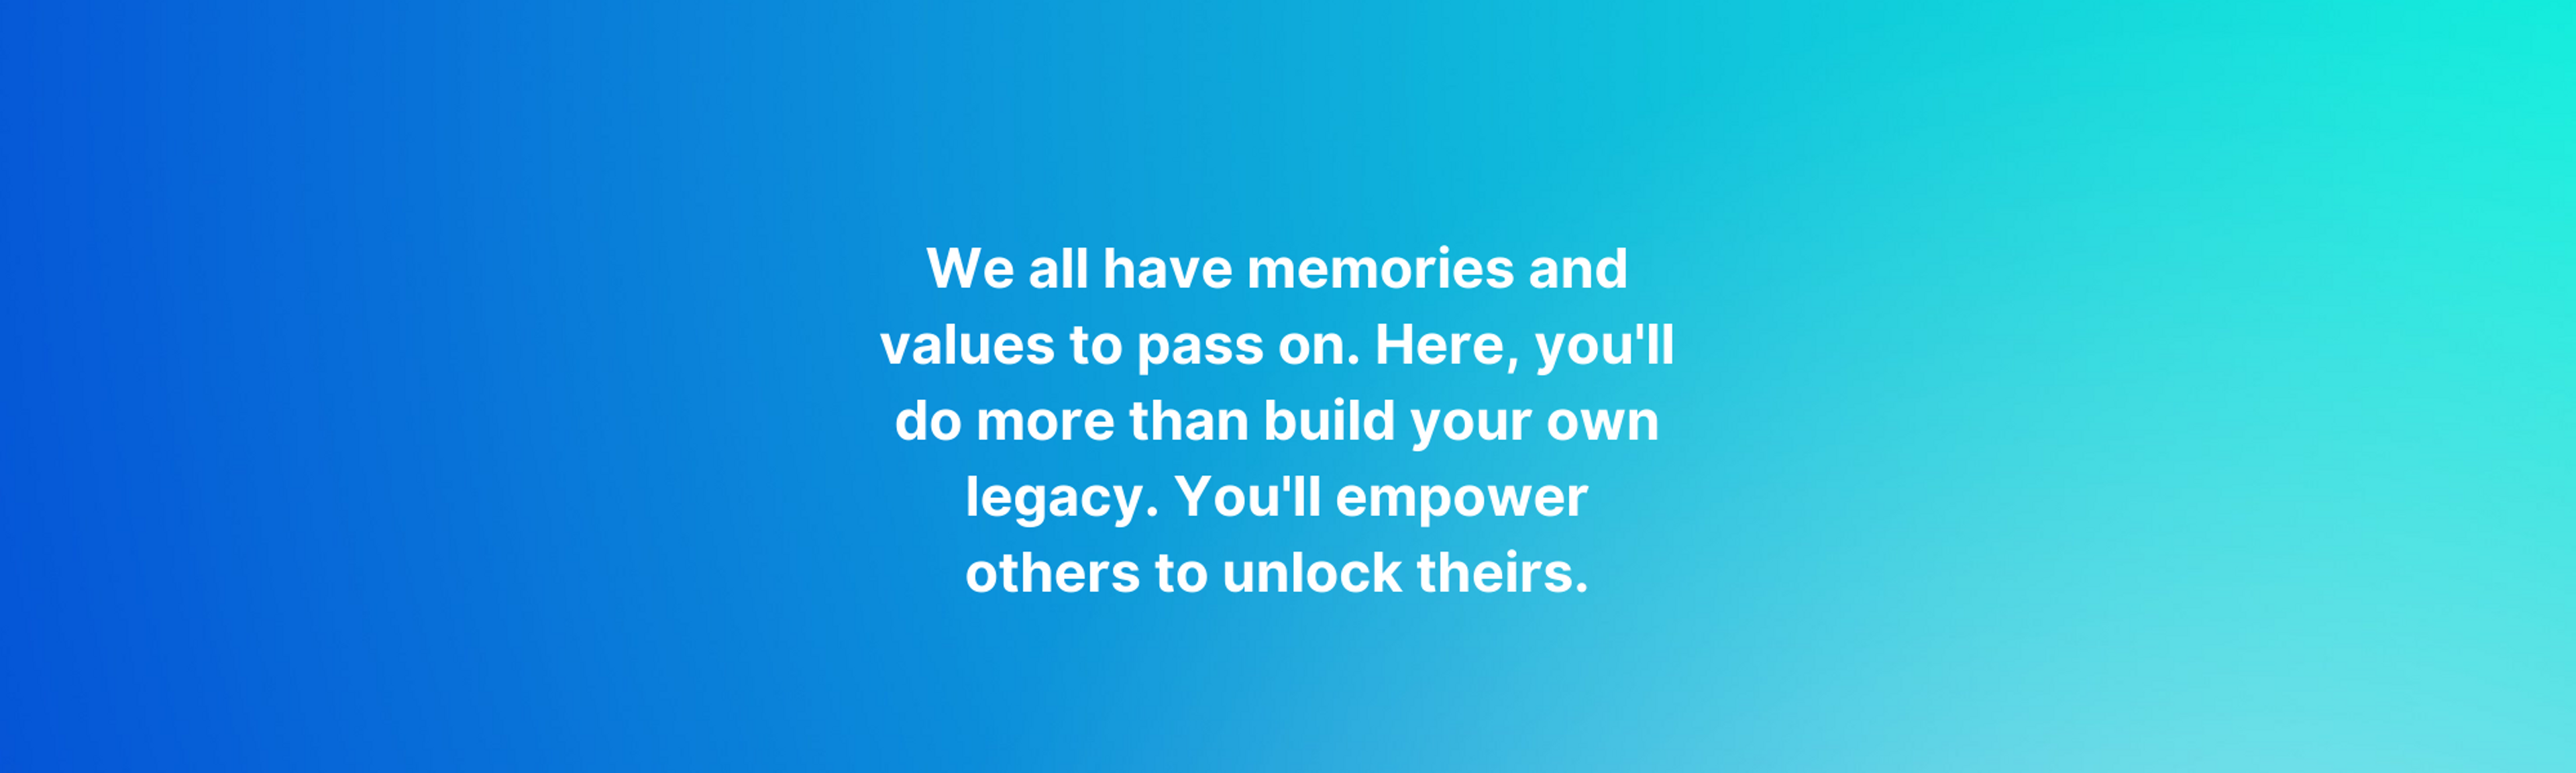 We all have memories and values to pass on. Here, you'll do more than build your own legacy. You'll empower others to unlock theirs.